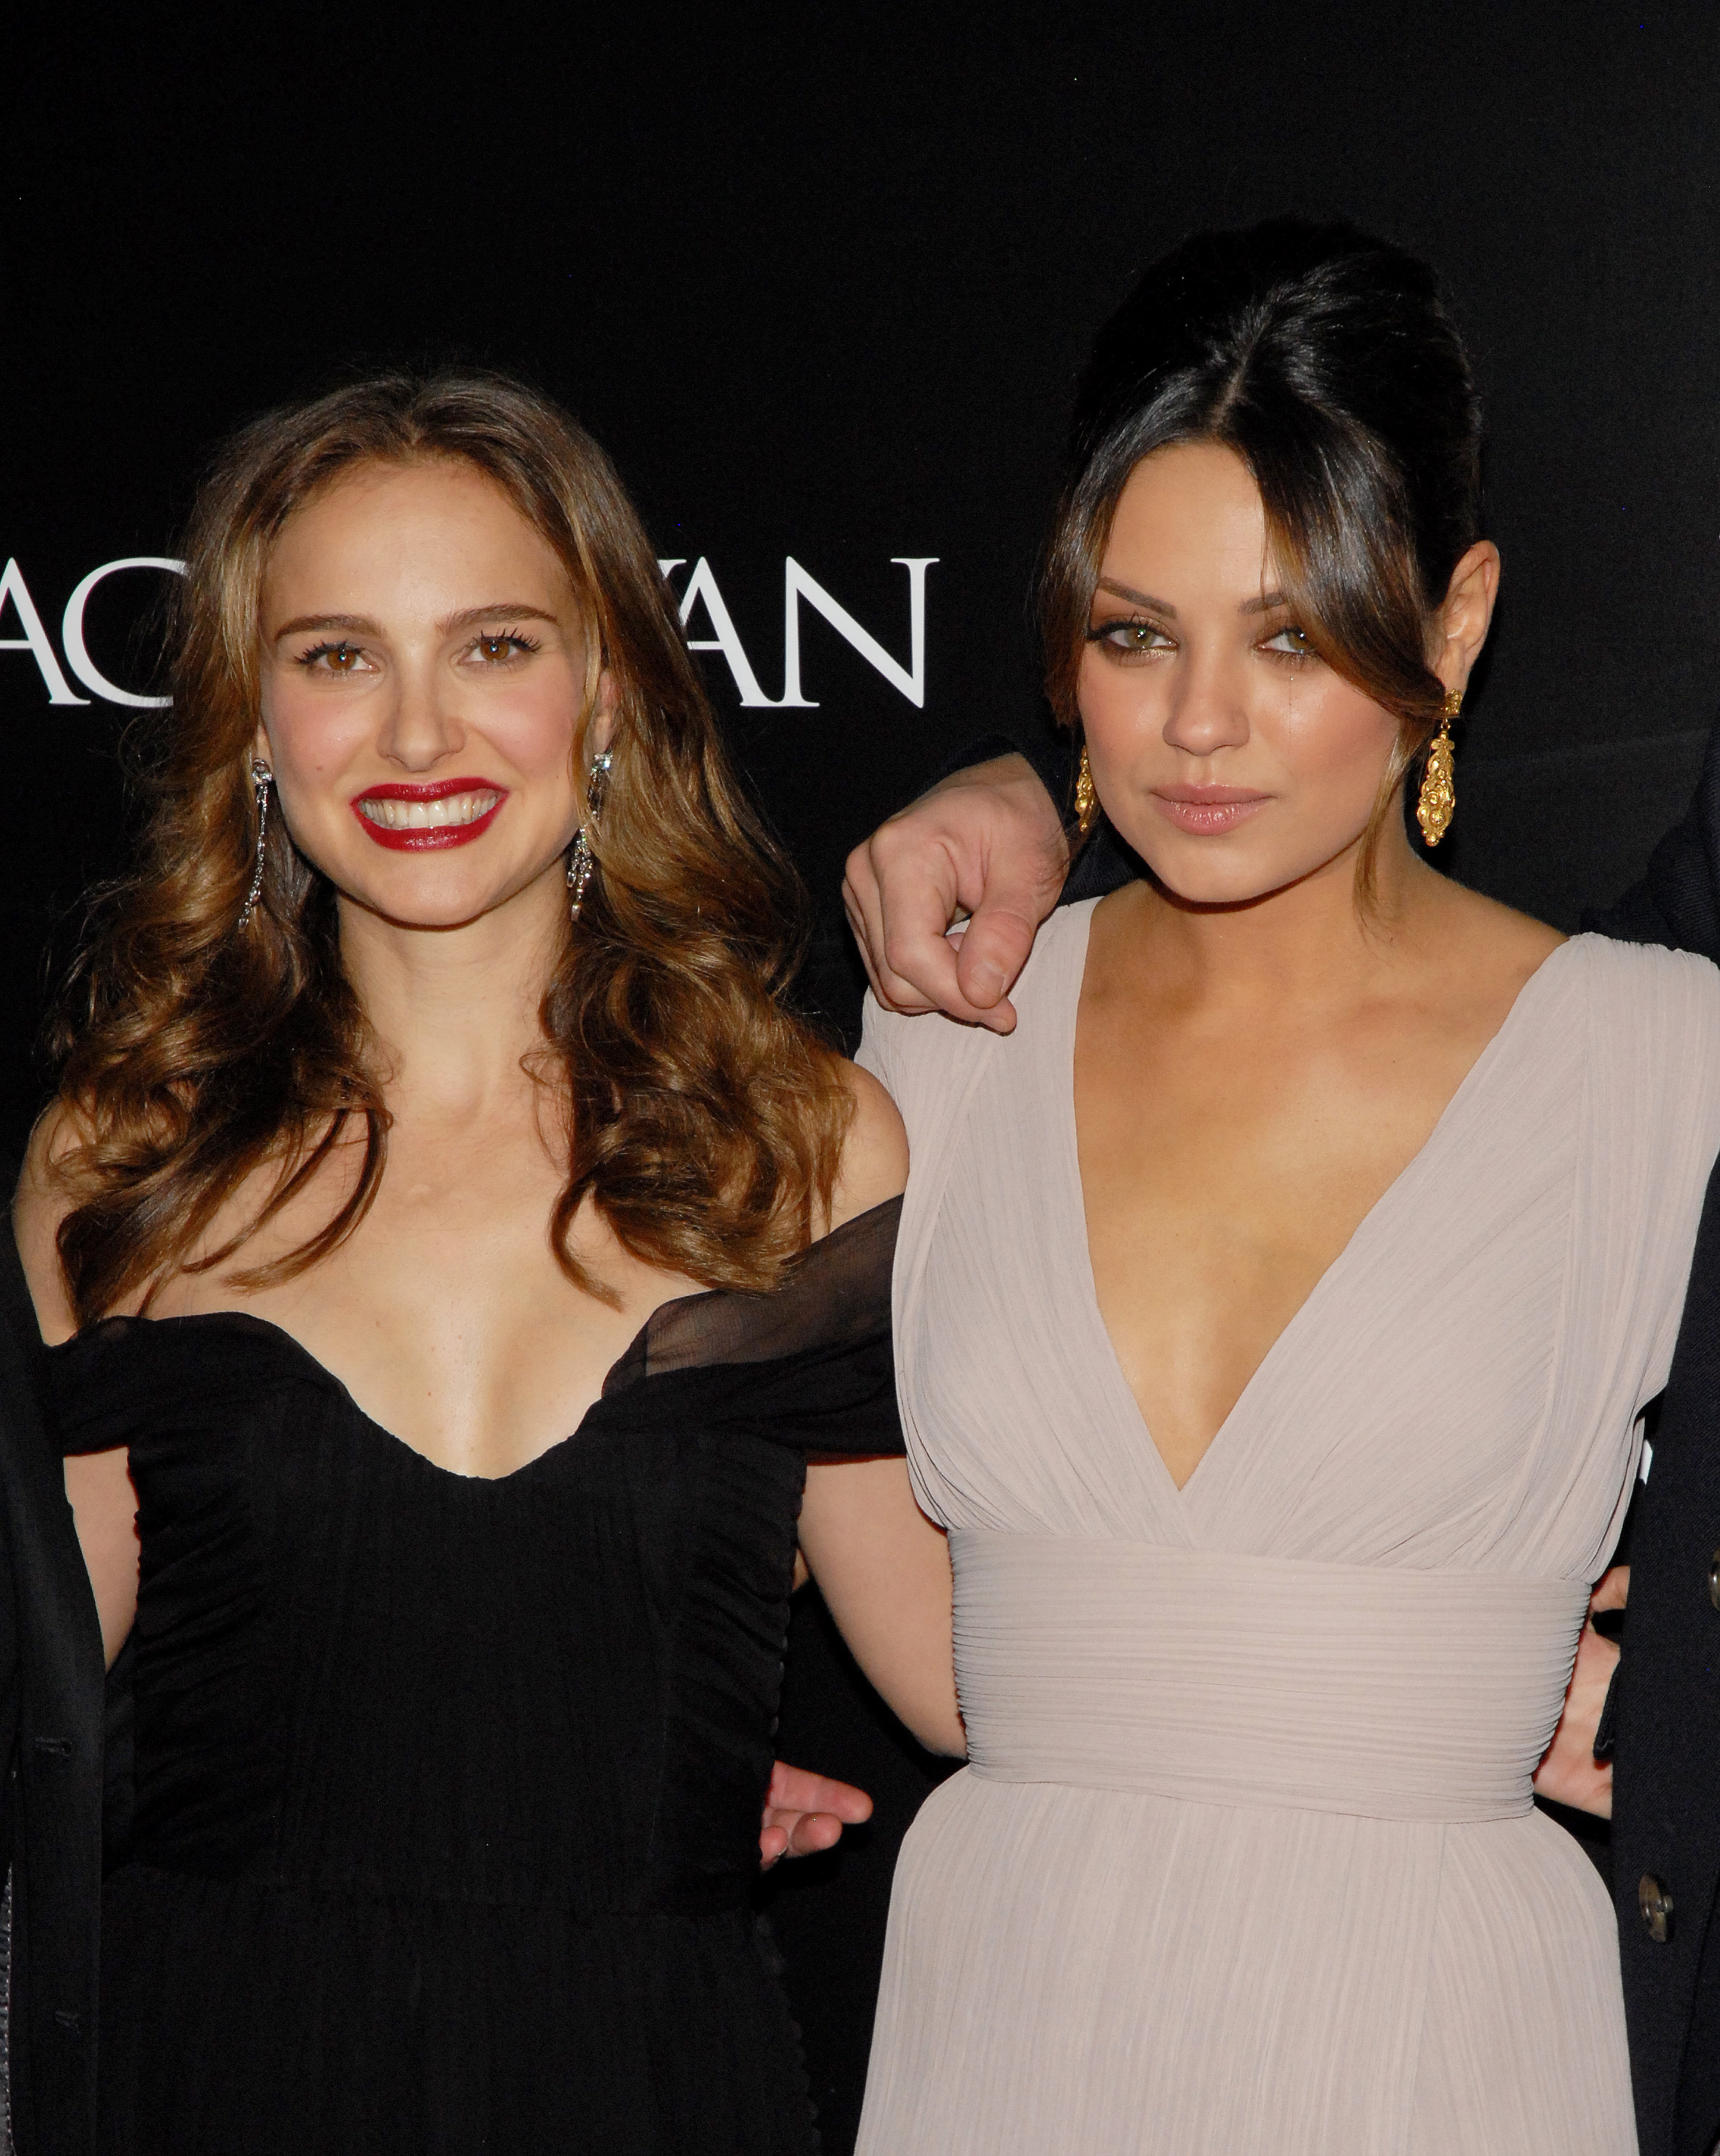 Natalie Portman and Mila Kunis at the premiere of "Black Swan" on November 30, 2010, in New York City. | Source: Getty Images